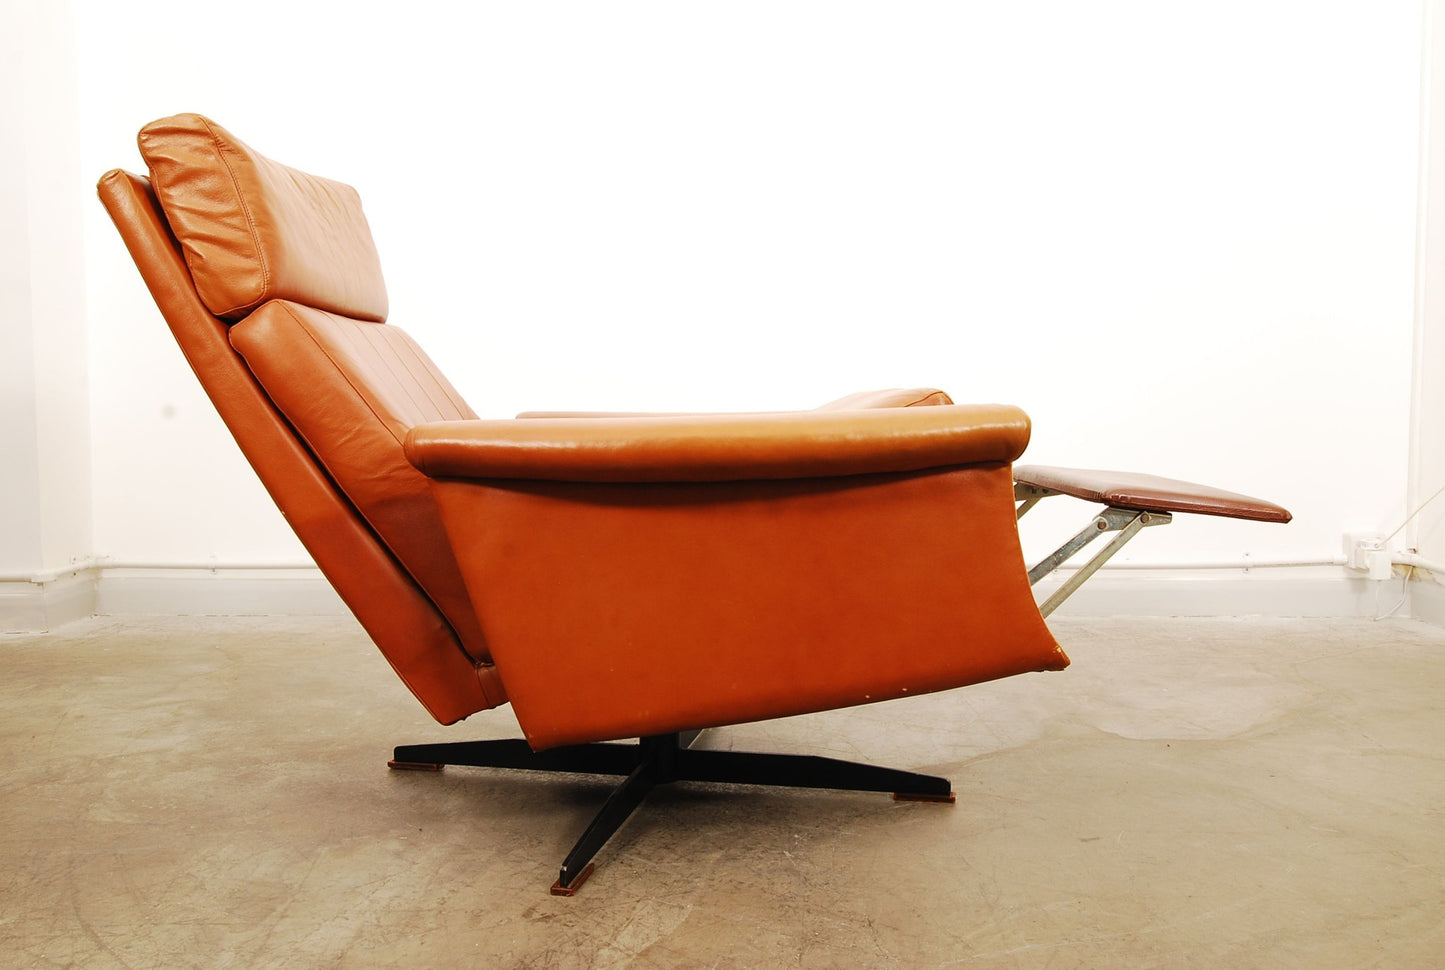 Reclining leather lounger